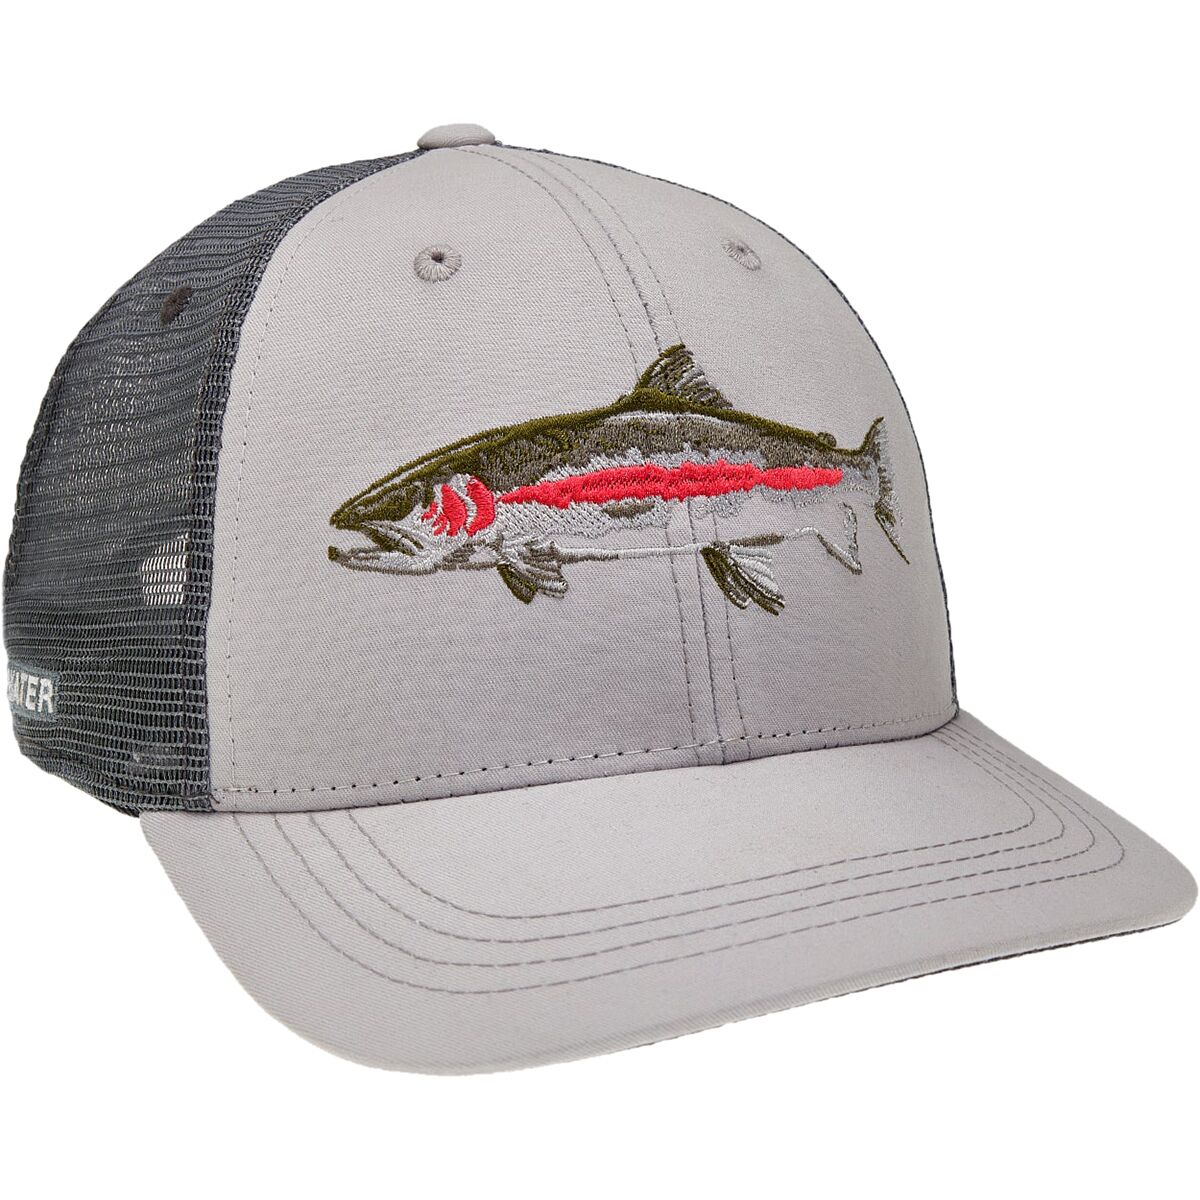 Rep Your Water Mykiss Hat Standard Fit Trucker Hat